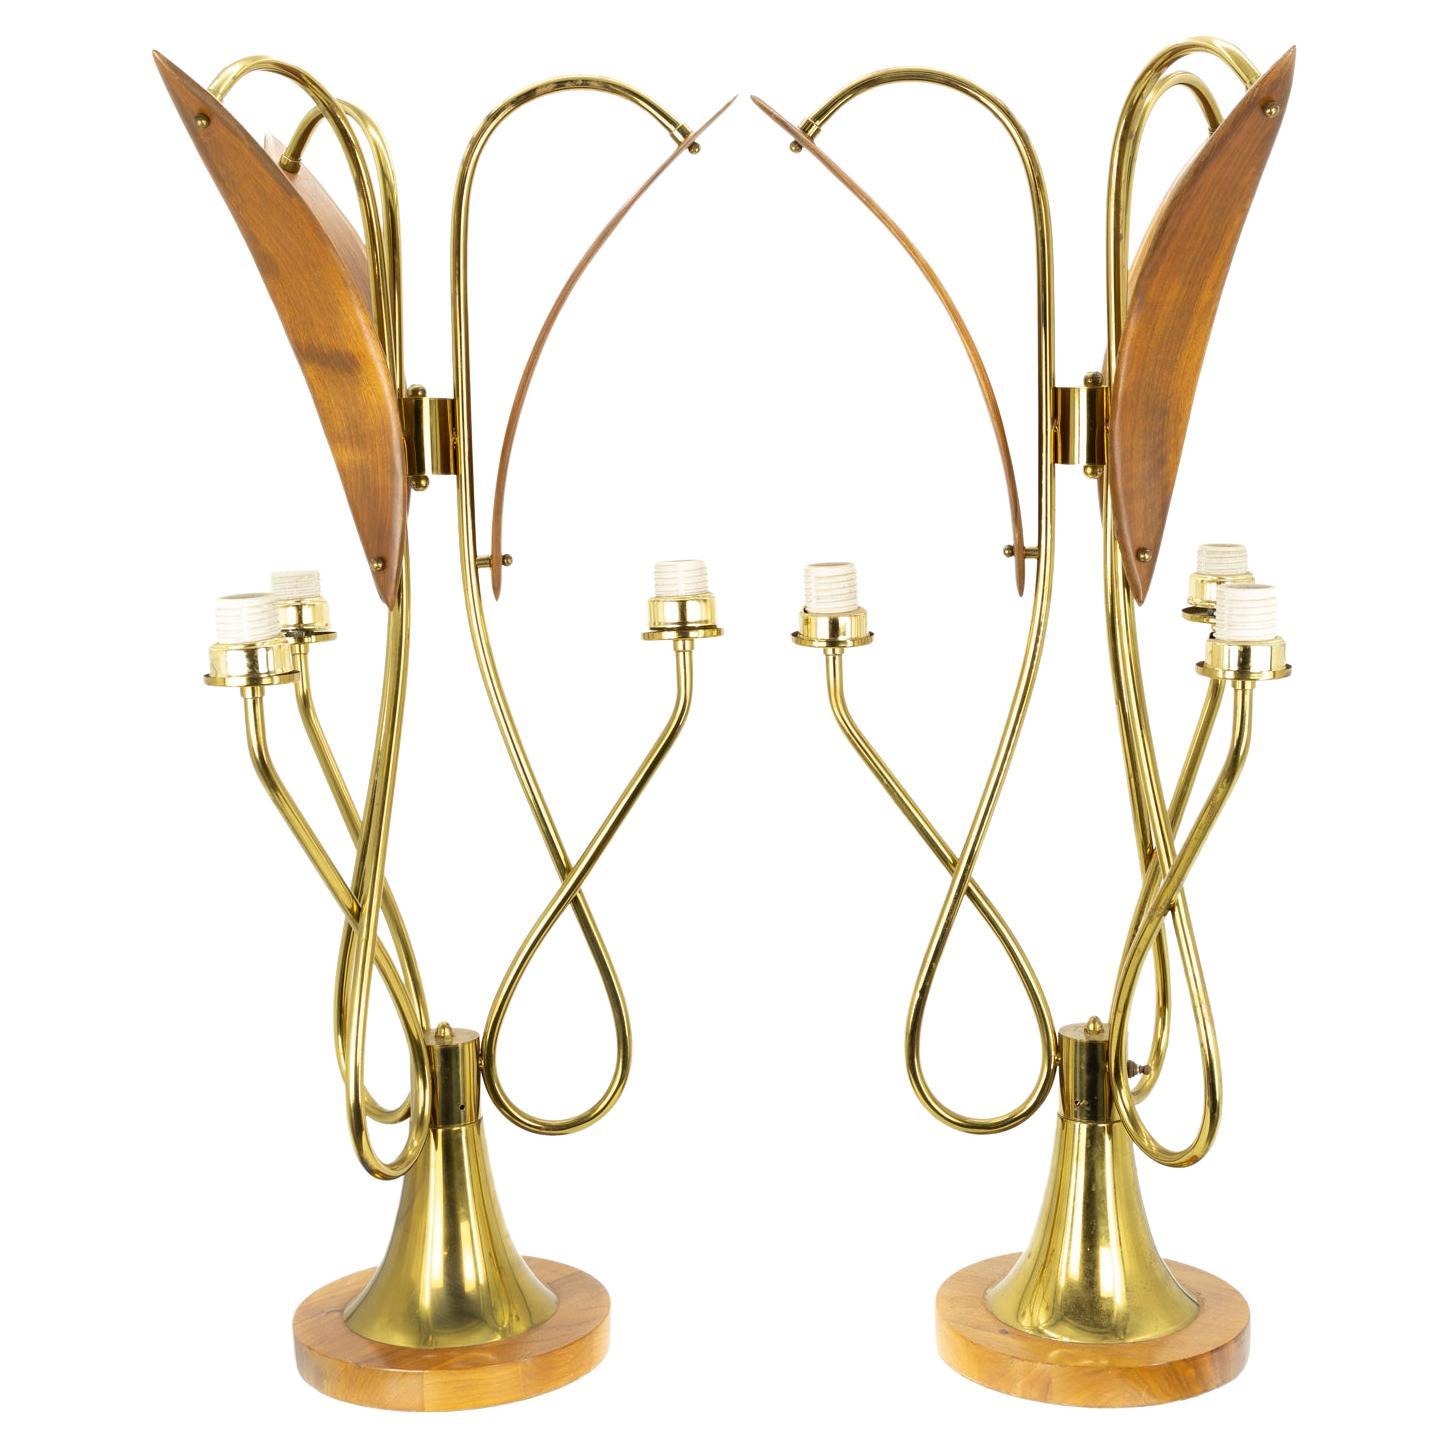 Nomina Organica Mid Century Brass Walnut Lamps - Pair For Sale